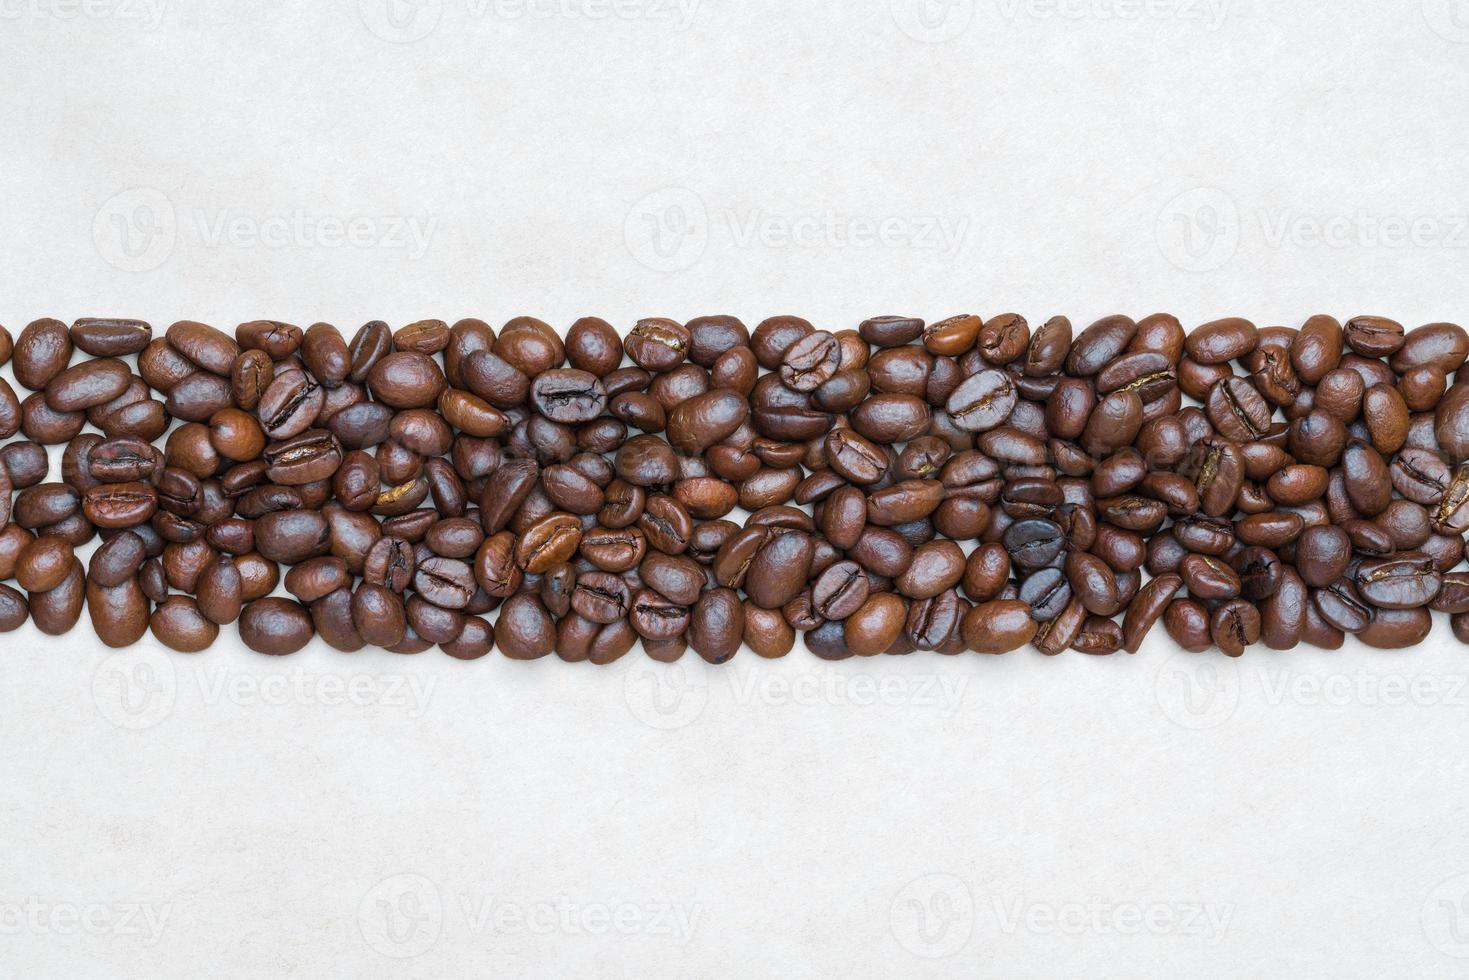 Brown coffee beans on background of recycled eco-friendly paper. Central horizontal location objects, copy space at top and bottom. Flat lay, close-up view of still life photo